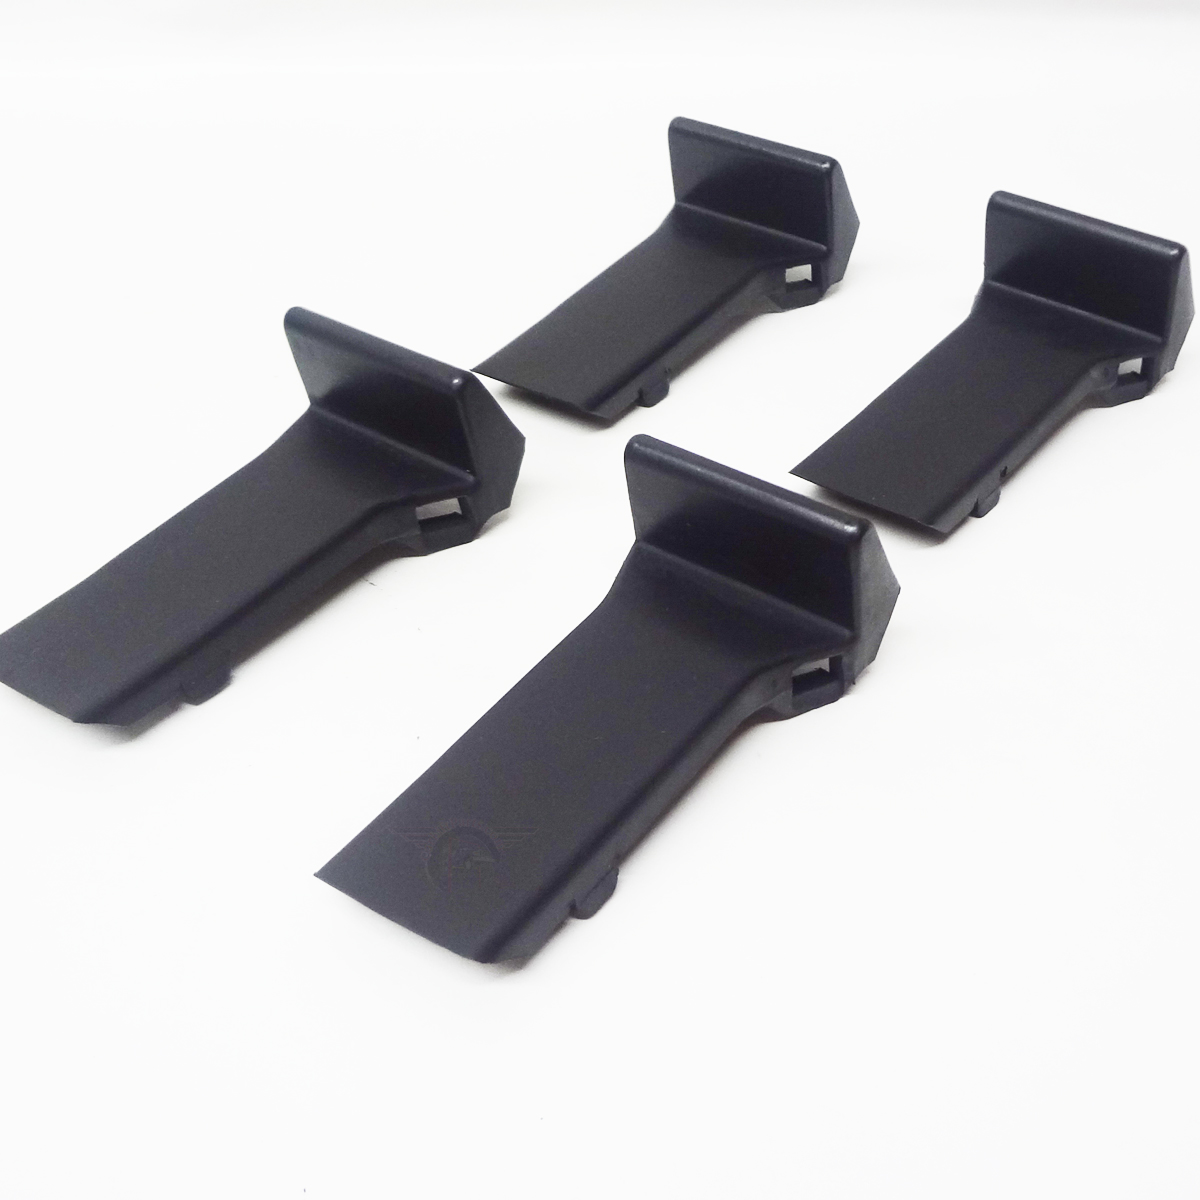 Jaw Protectors,4Pcs ST4027645 Jaw Protectors Guard Protective Covers Tire Changer Clamp Cover 